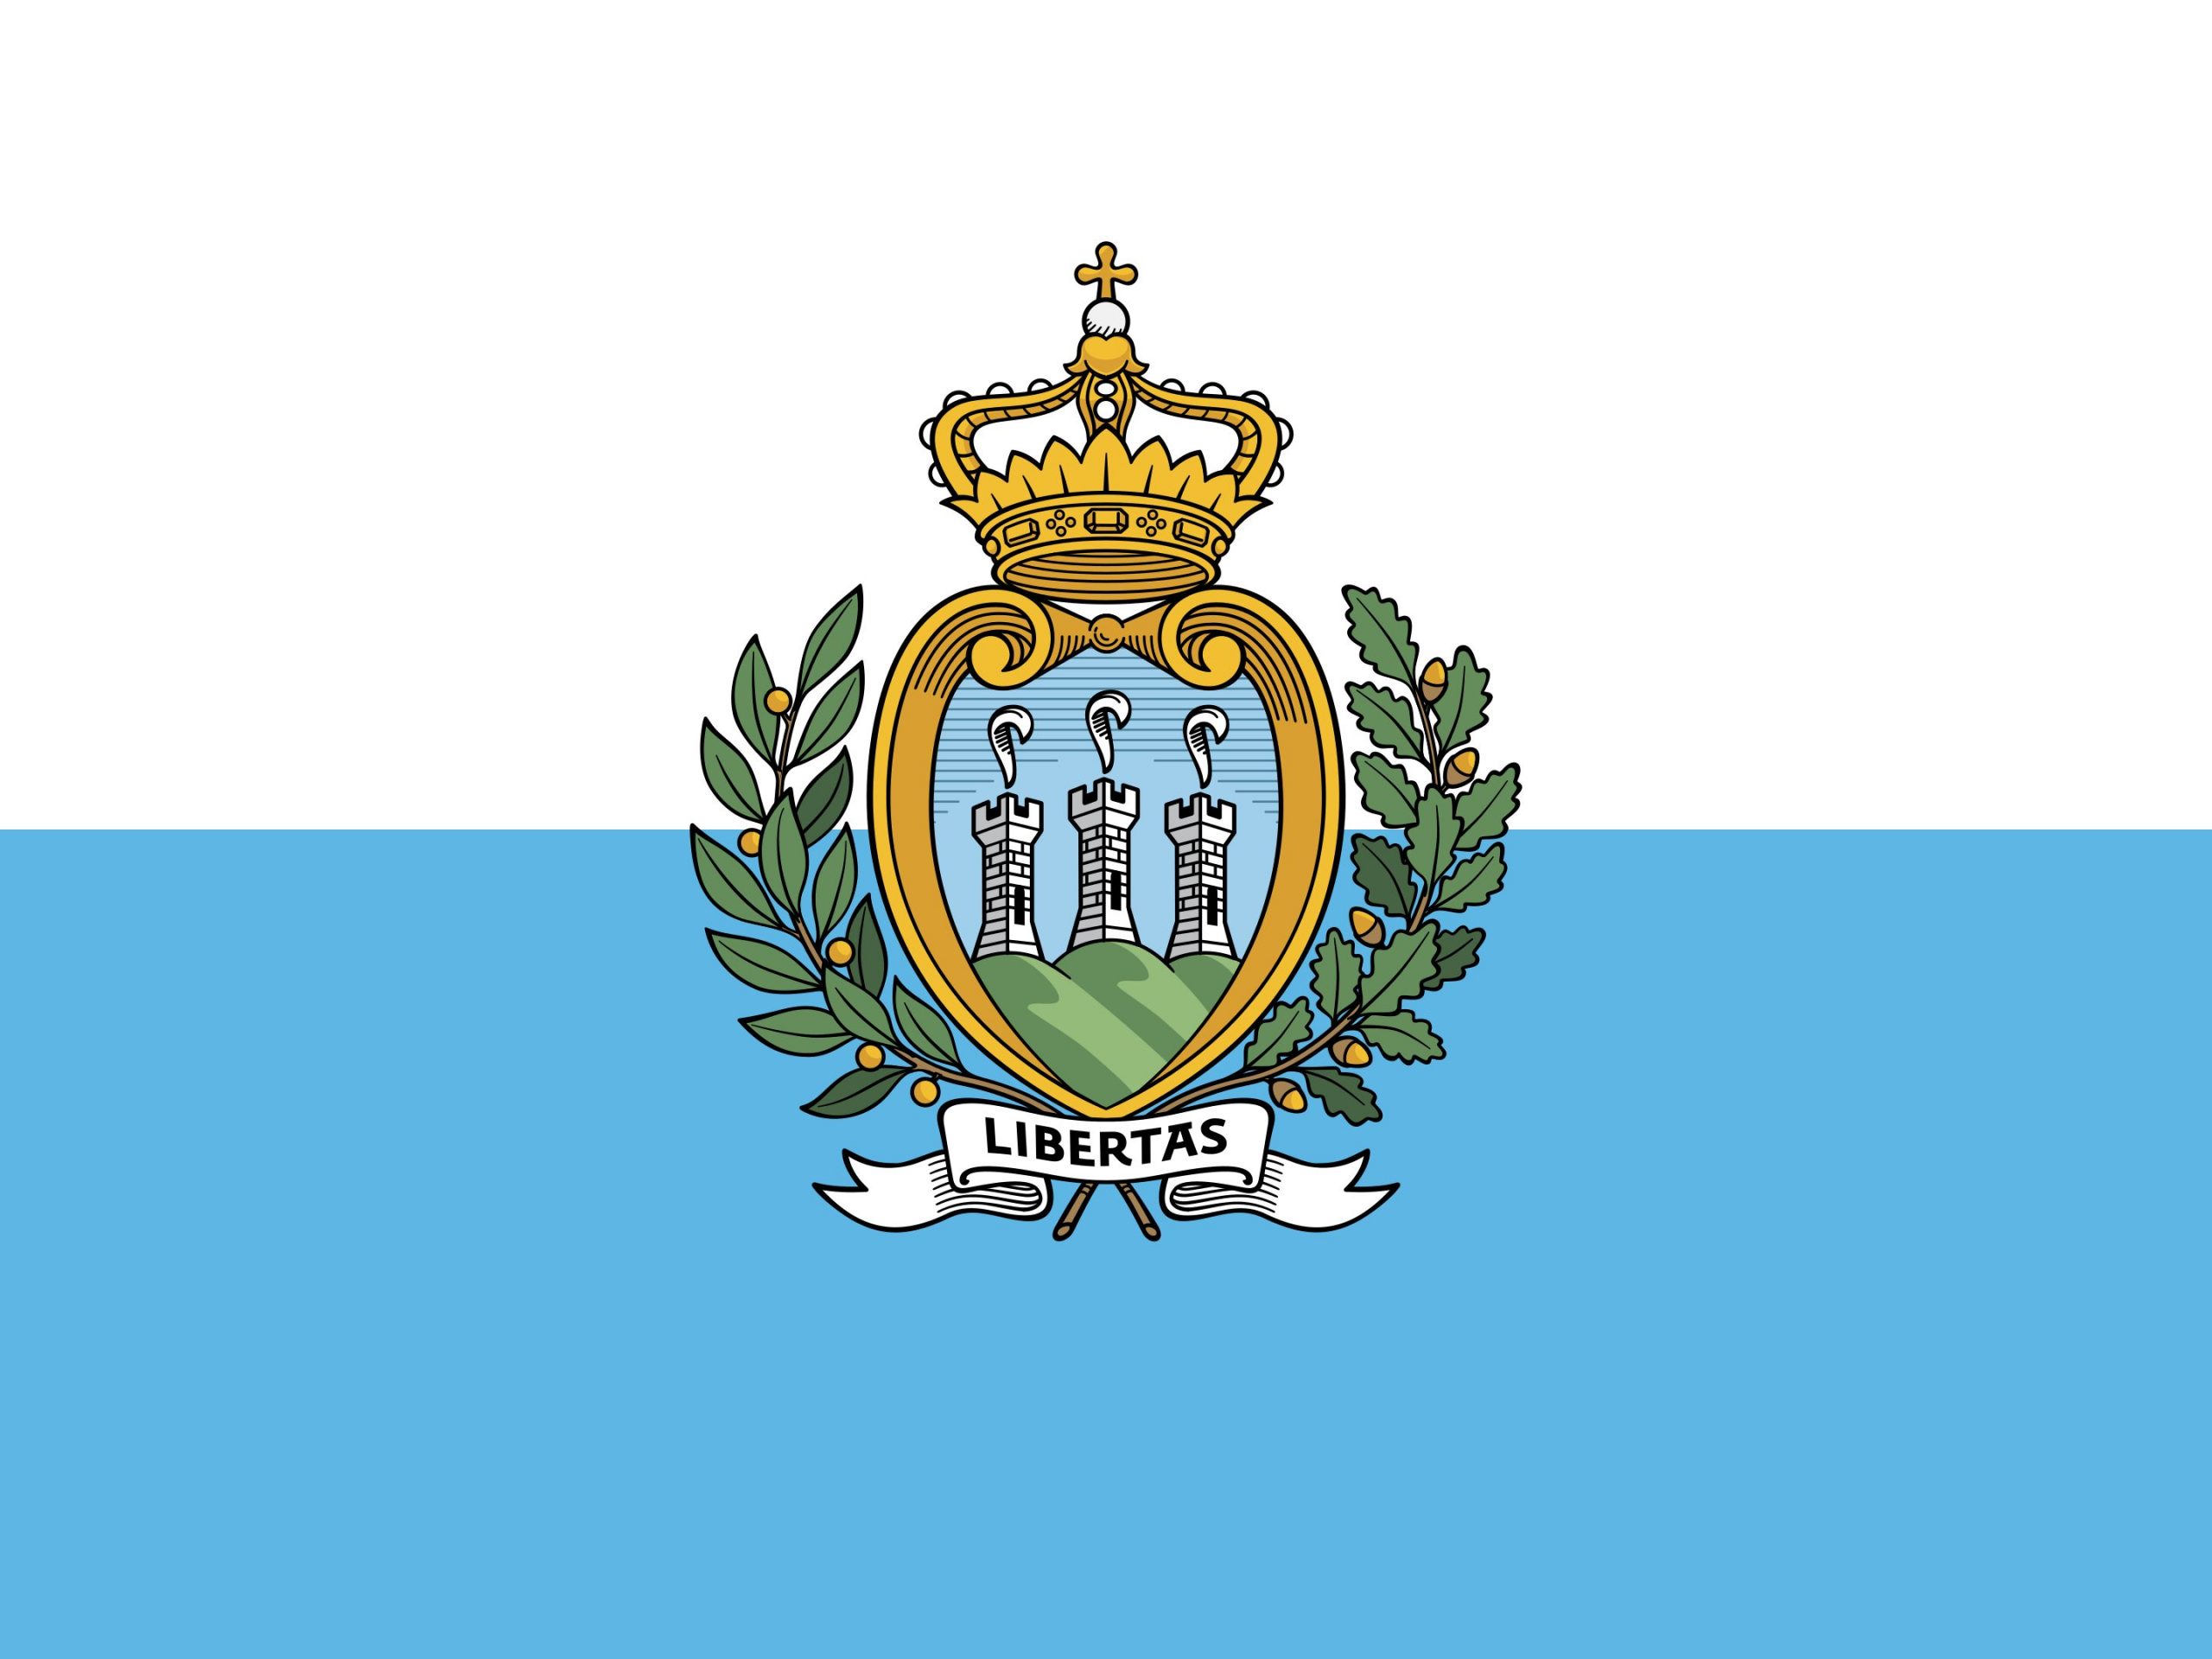 Facts about San Marino